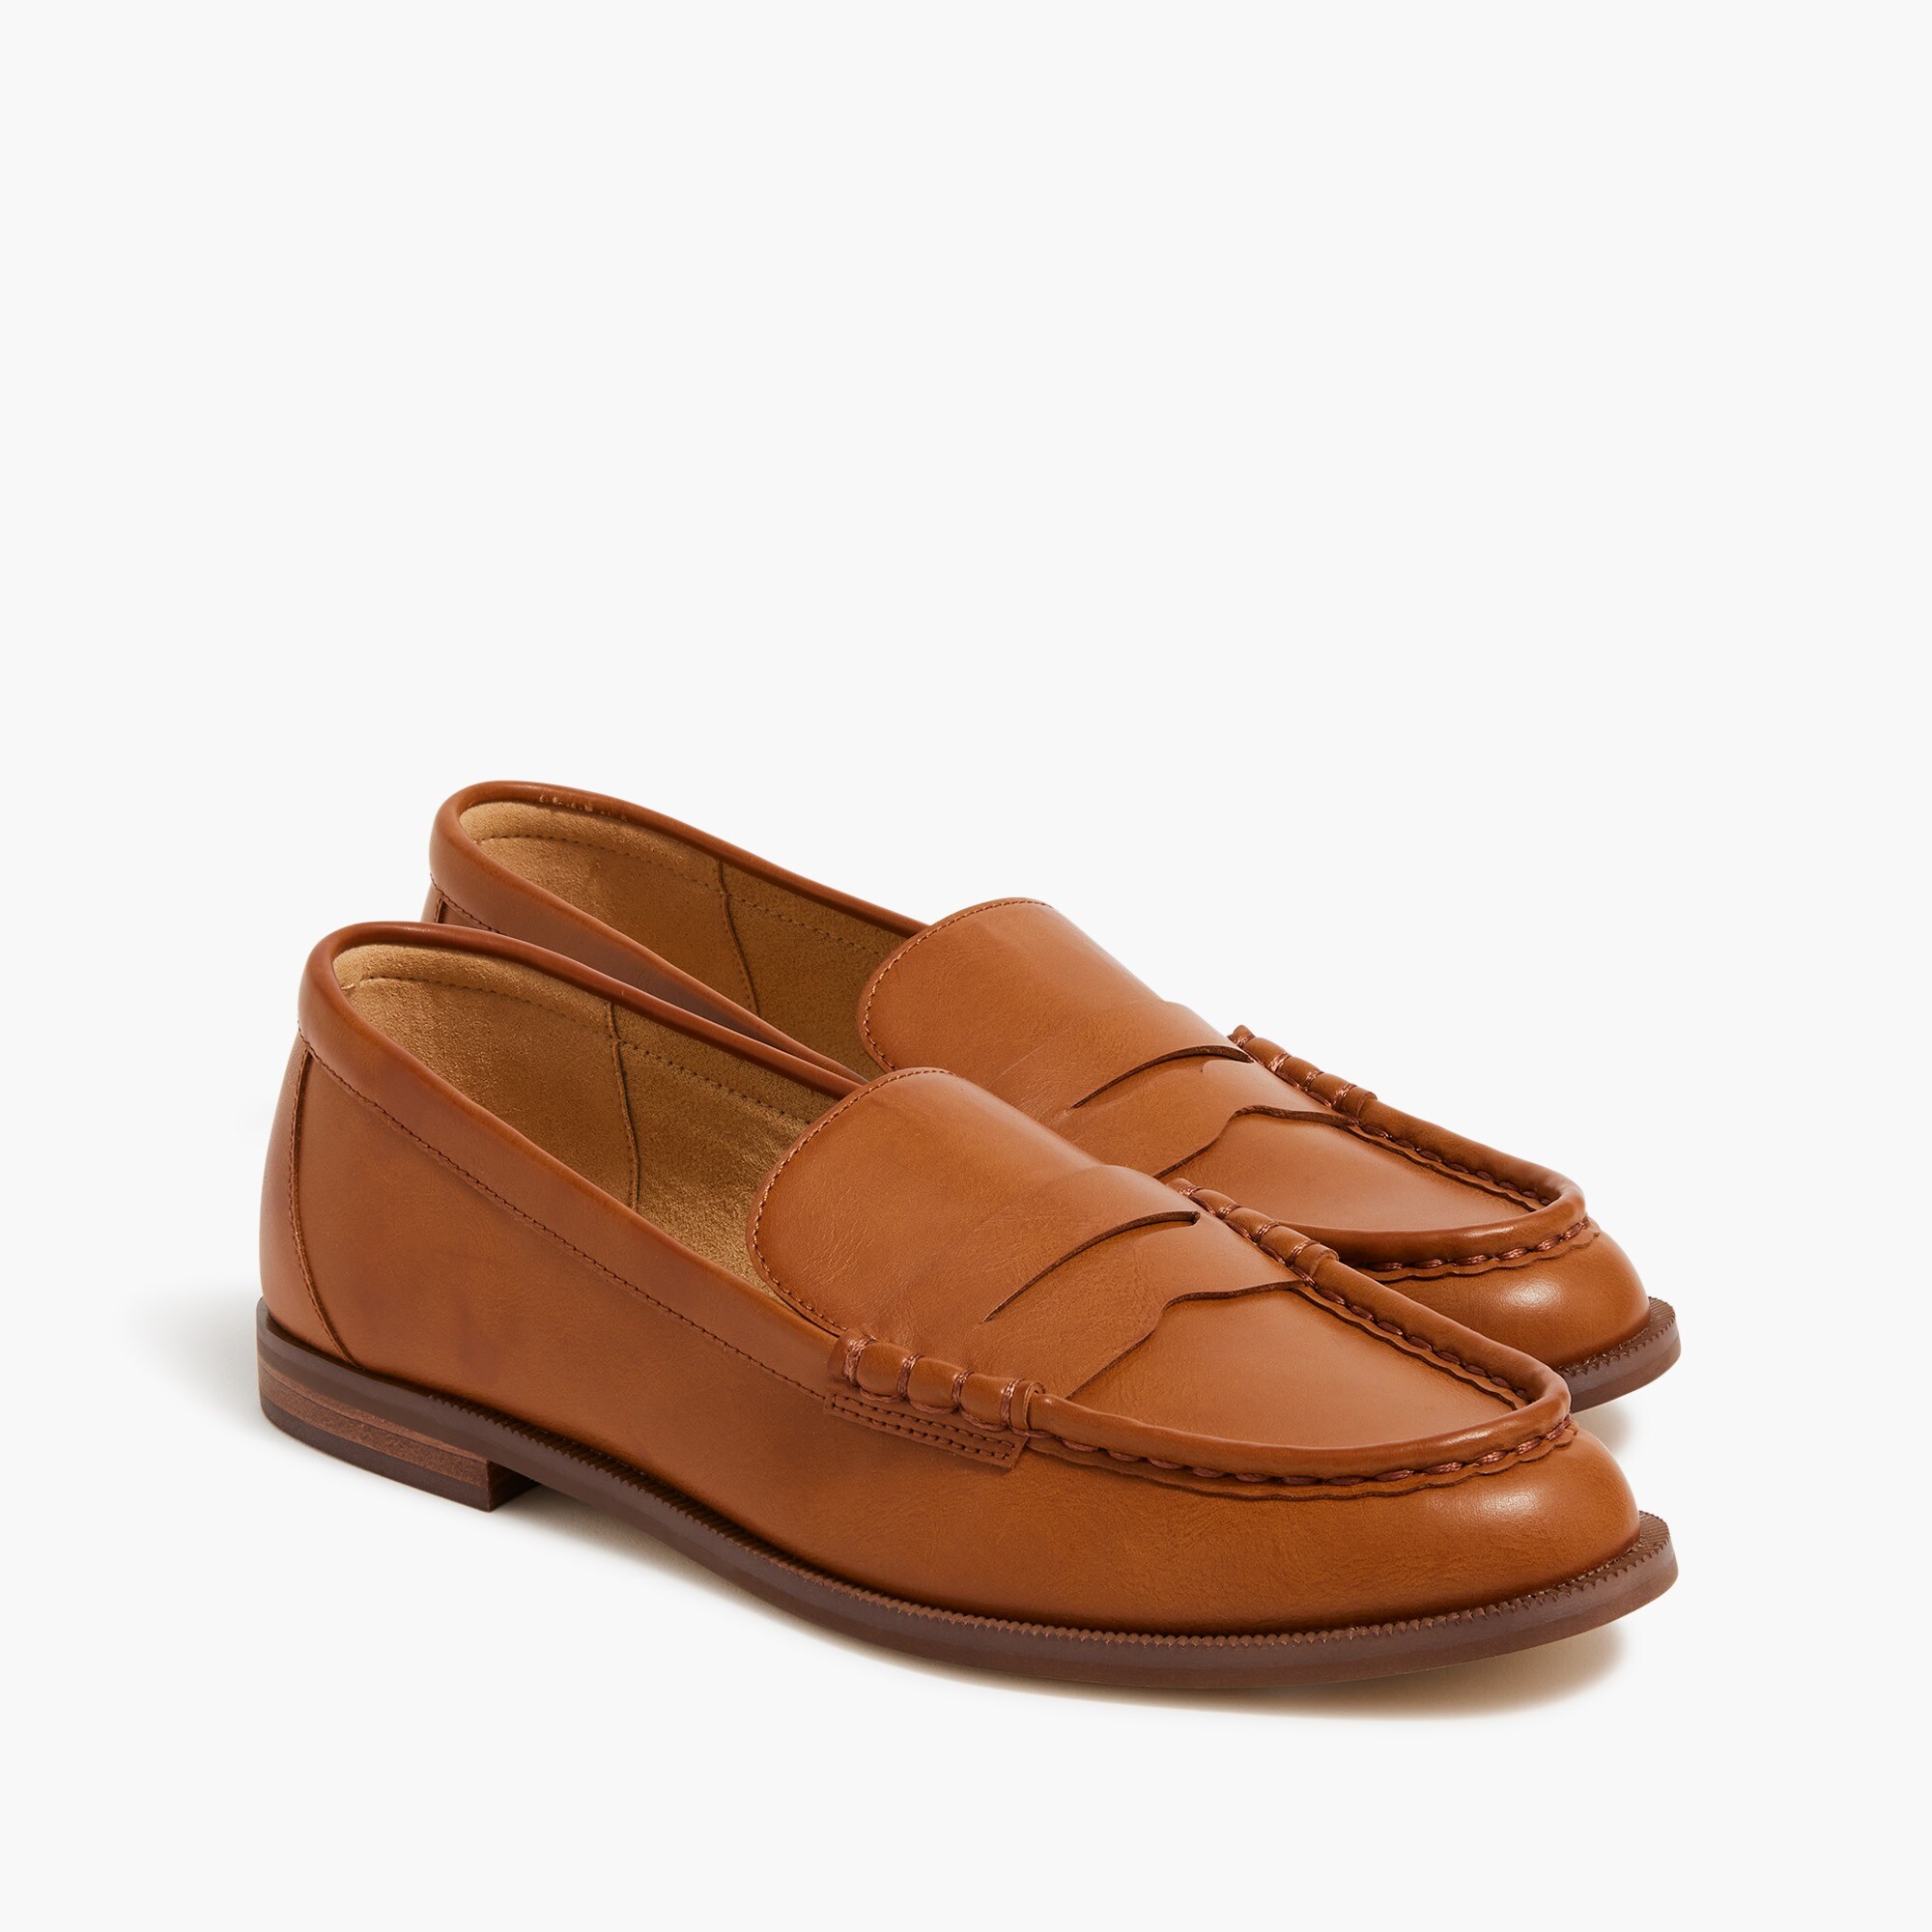  Penny loafers